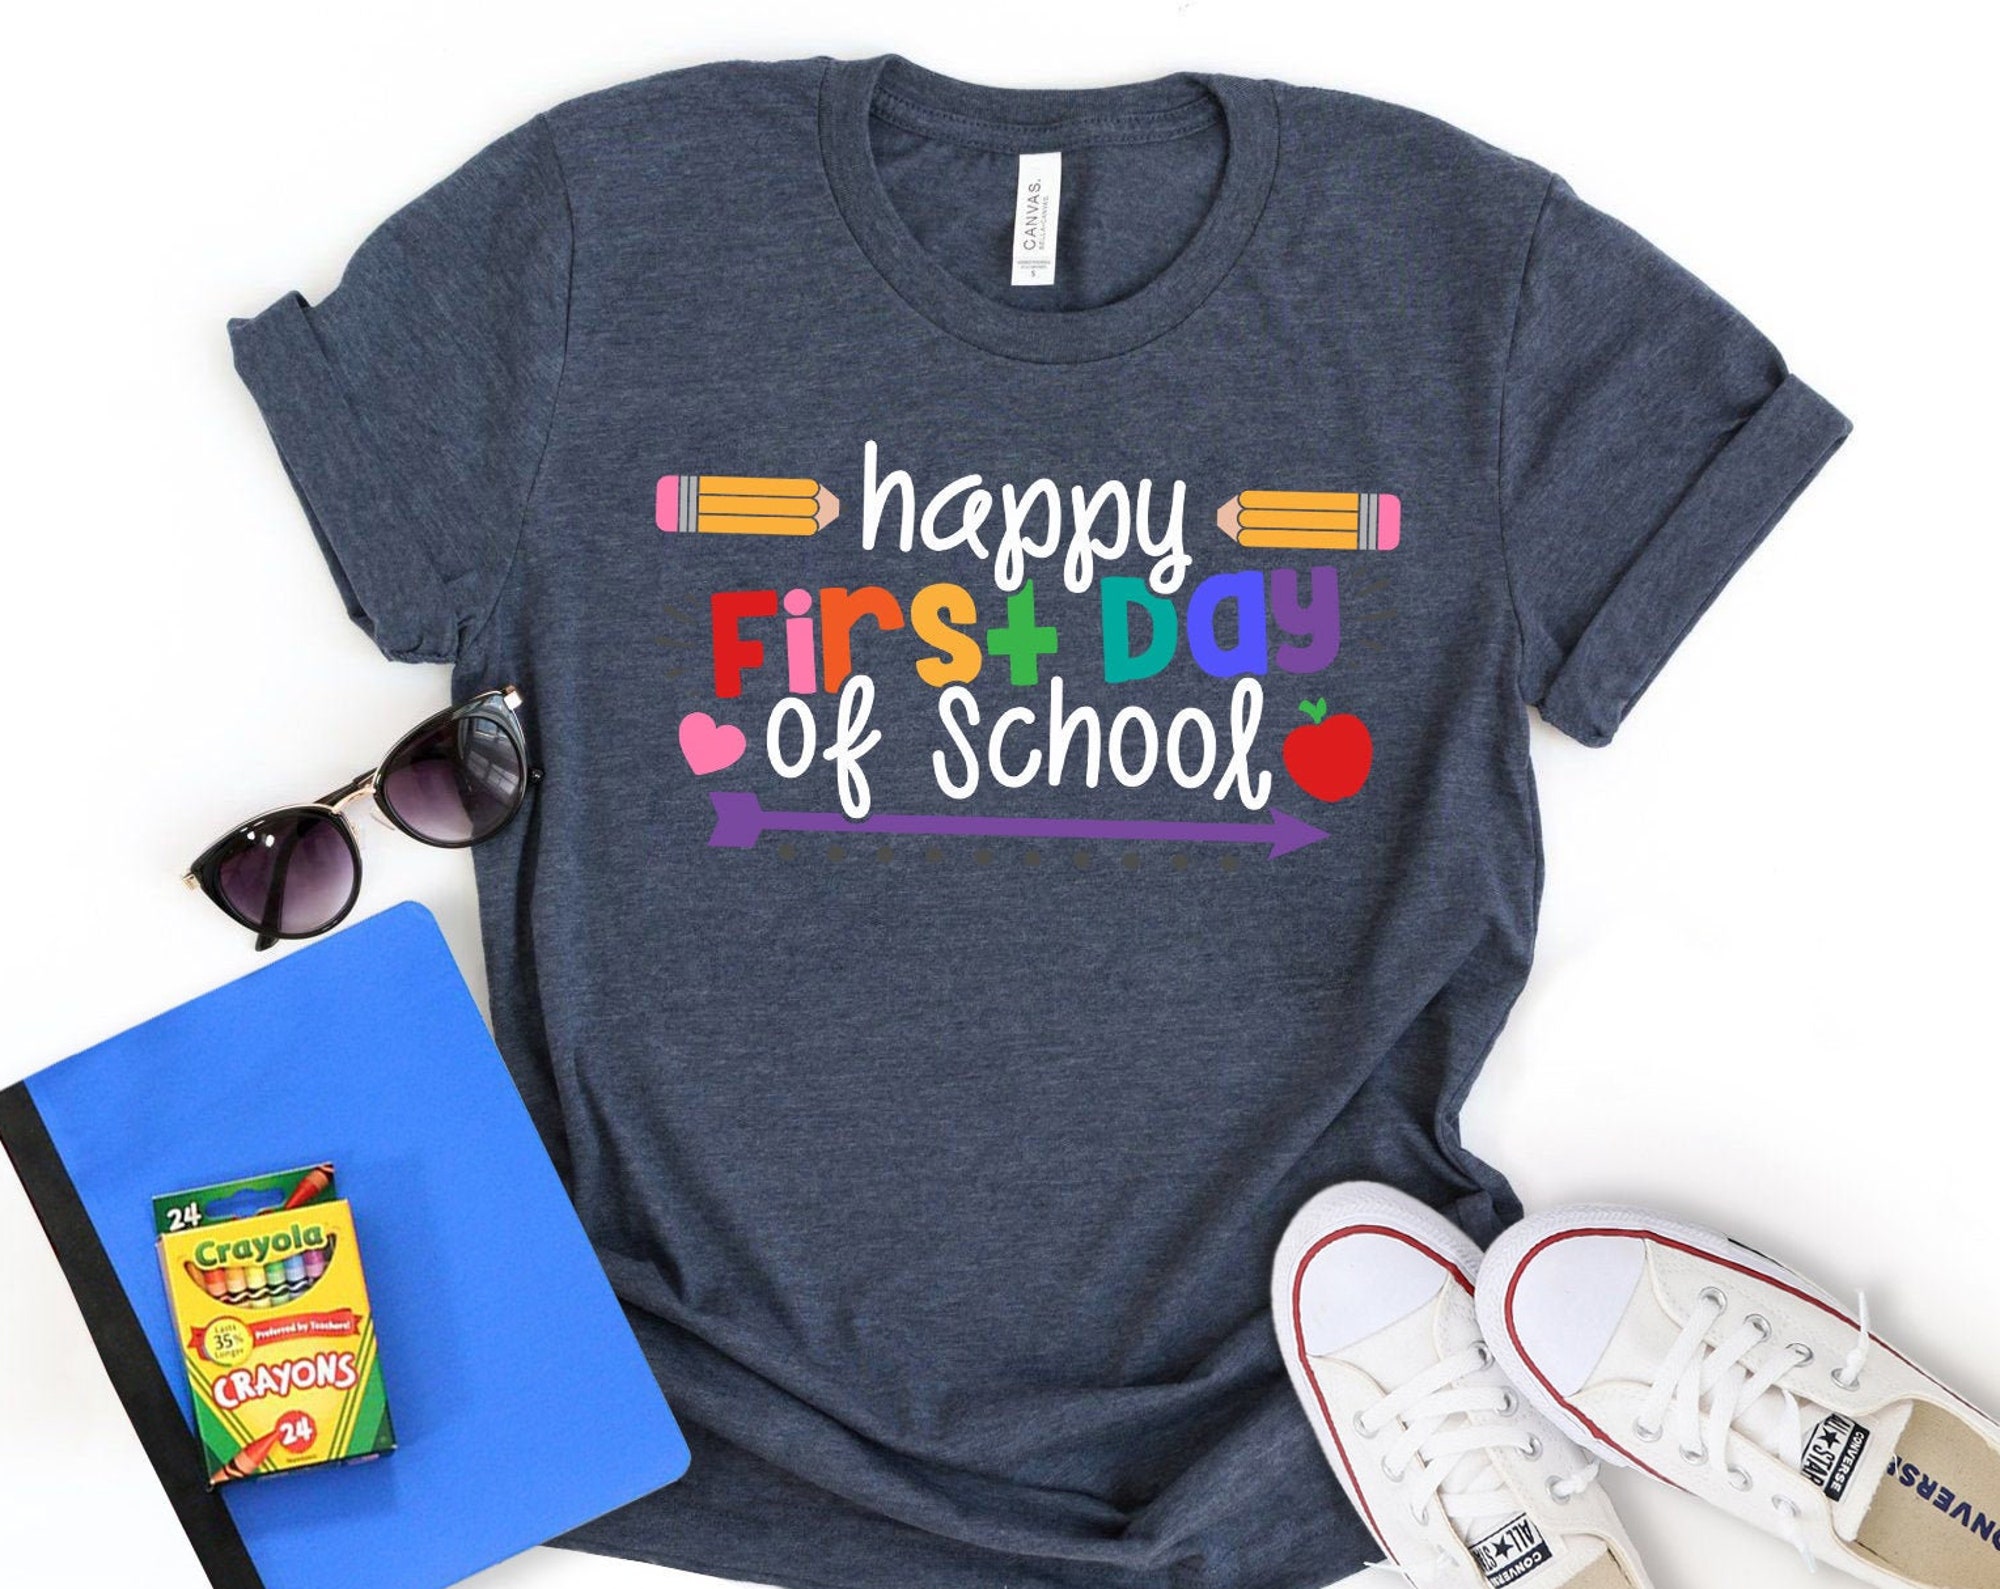 Discover First Day of School Shirt - Happy First Day of School Shirt